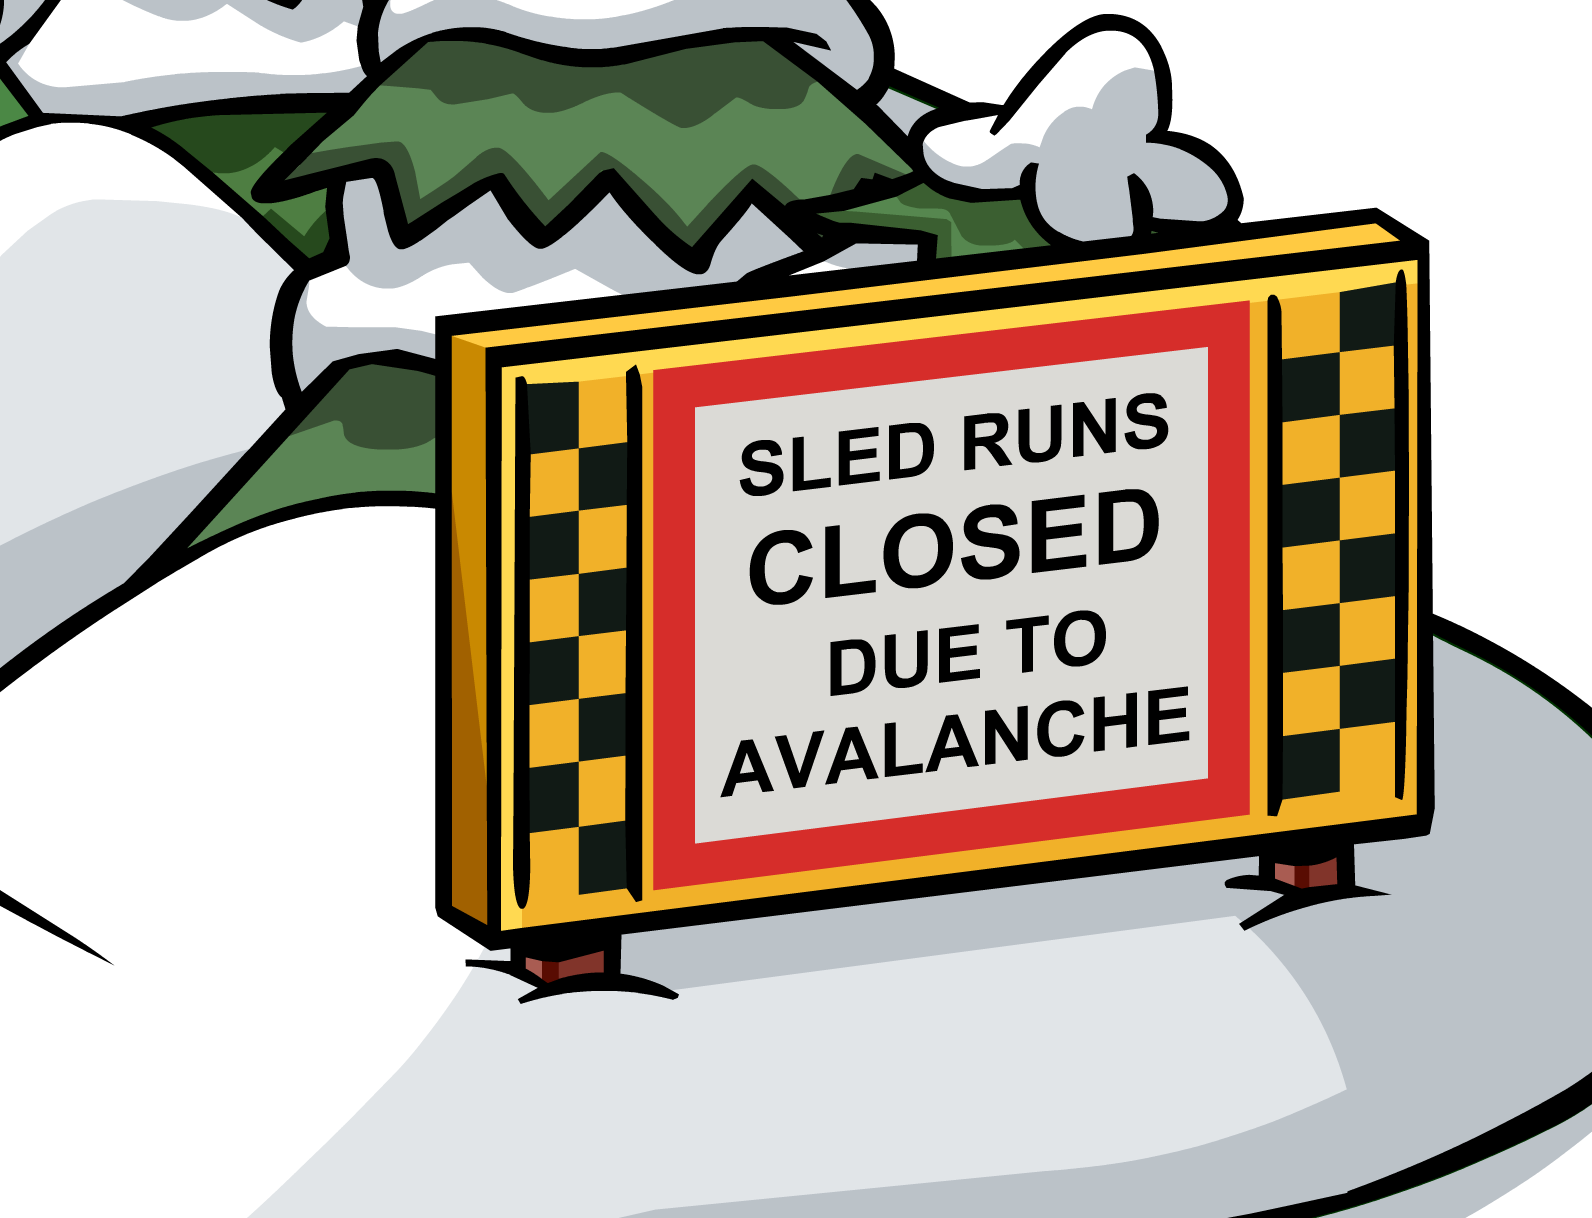 Mission 4: Avalanche Rescue step-by-step guide